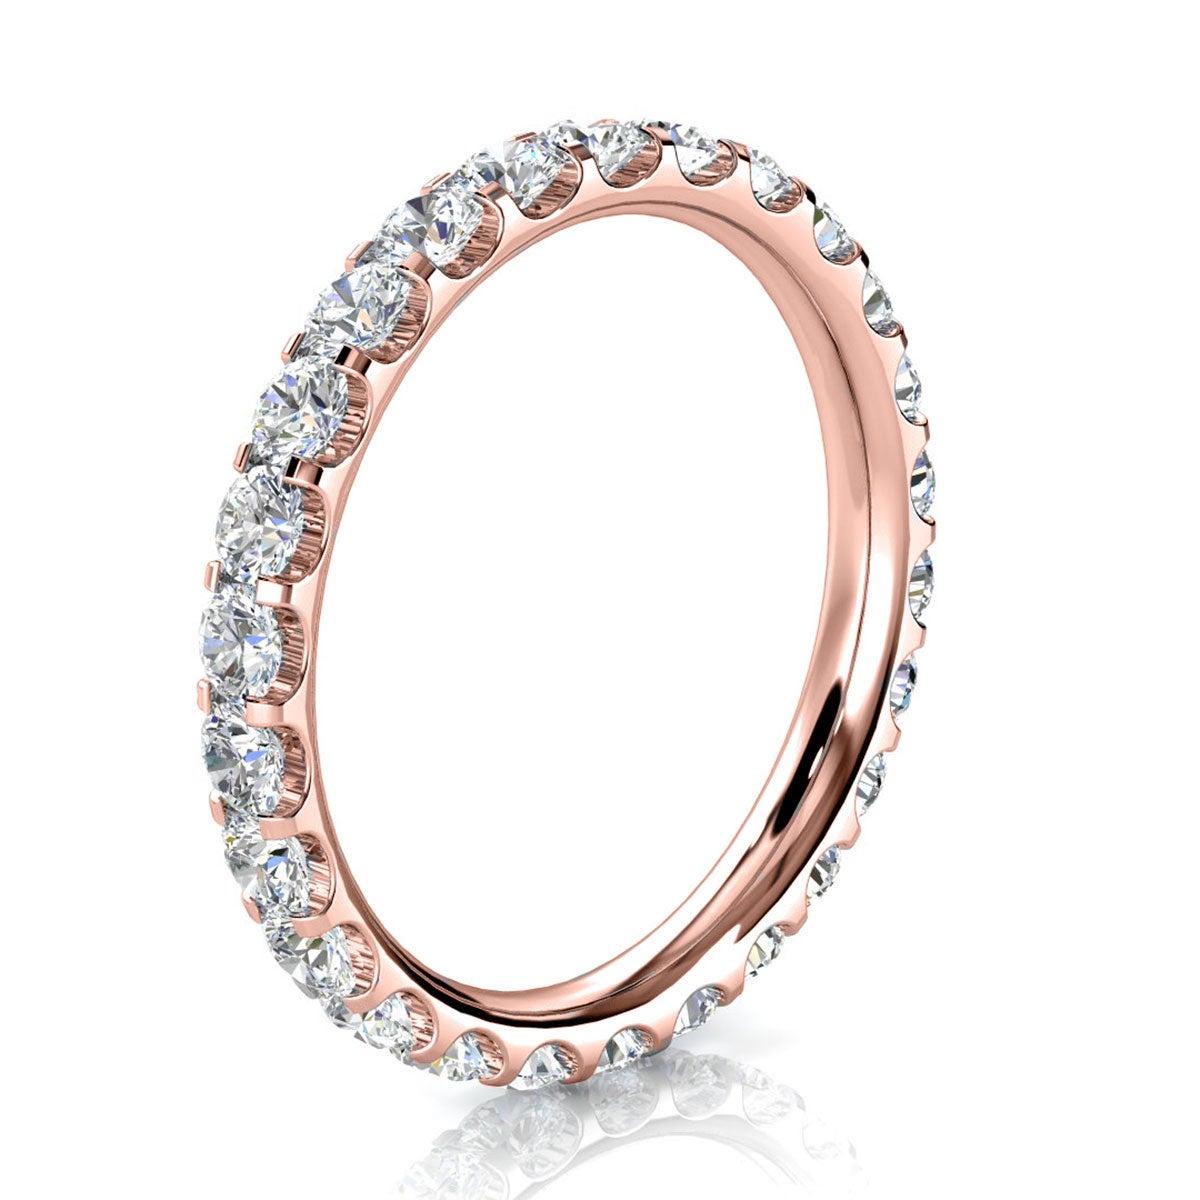 For Sale:  14k Rose Gold Viola Eternity Micro-Prong Diamond Ring '1 Ct. tw' 2